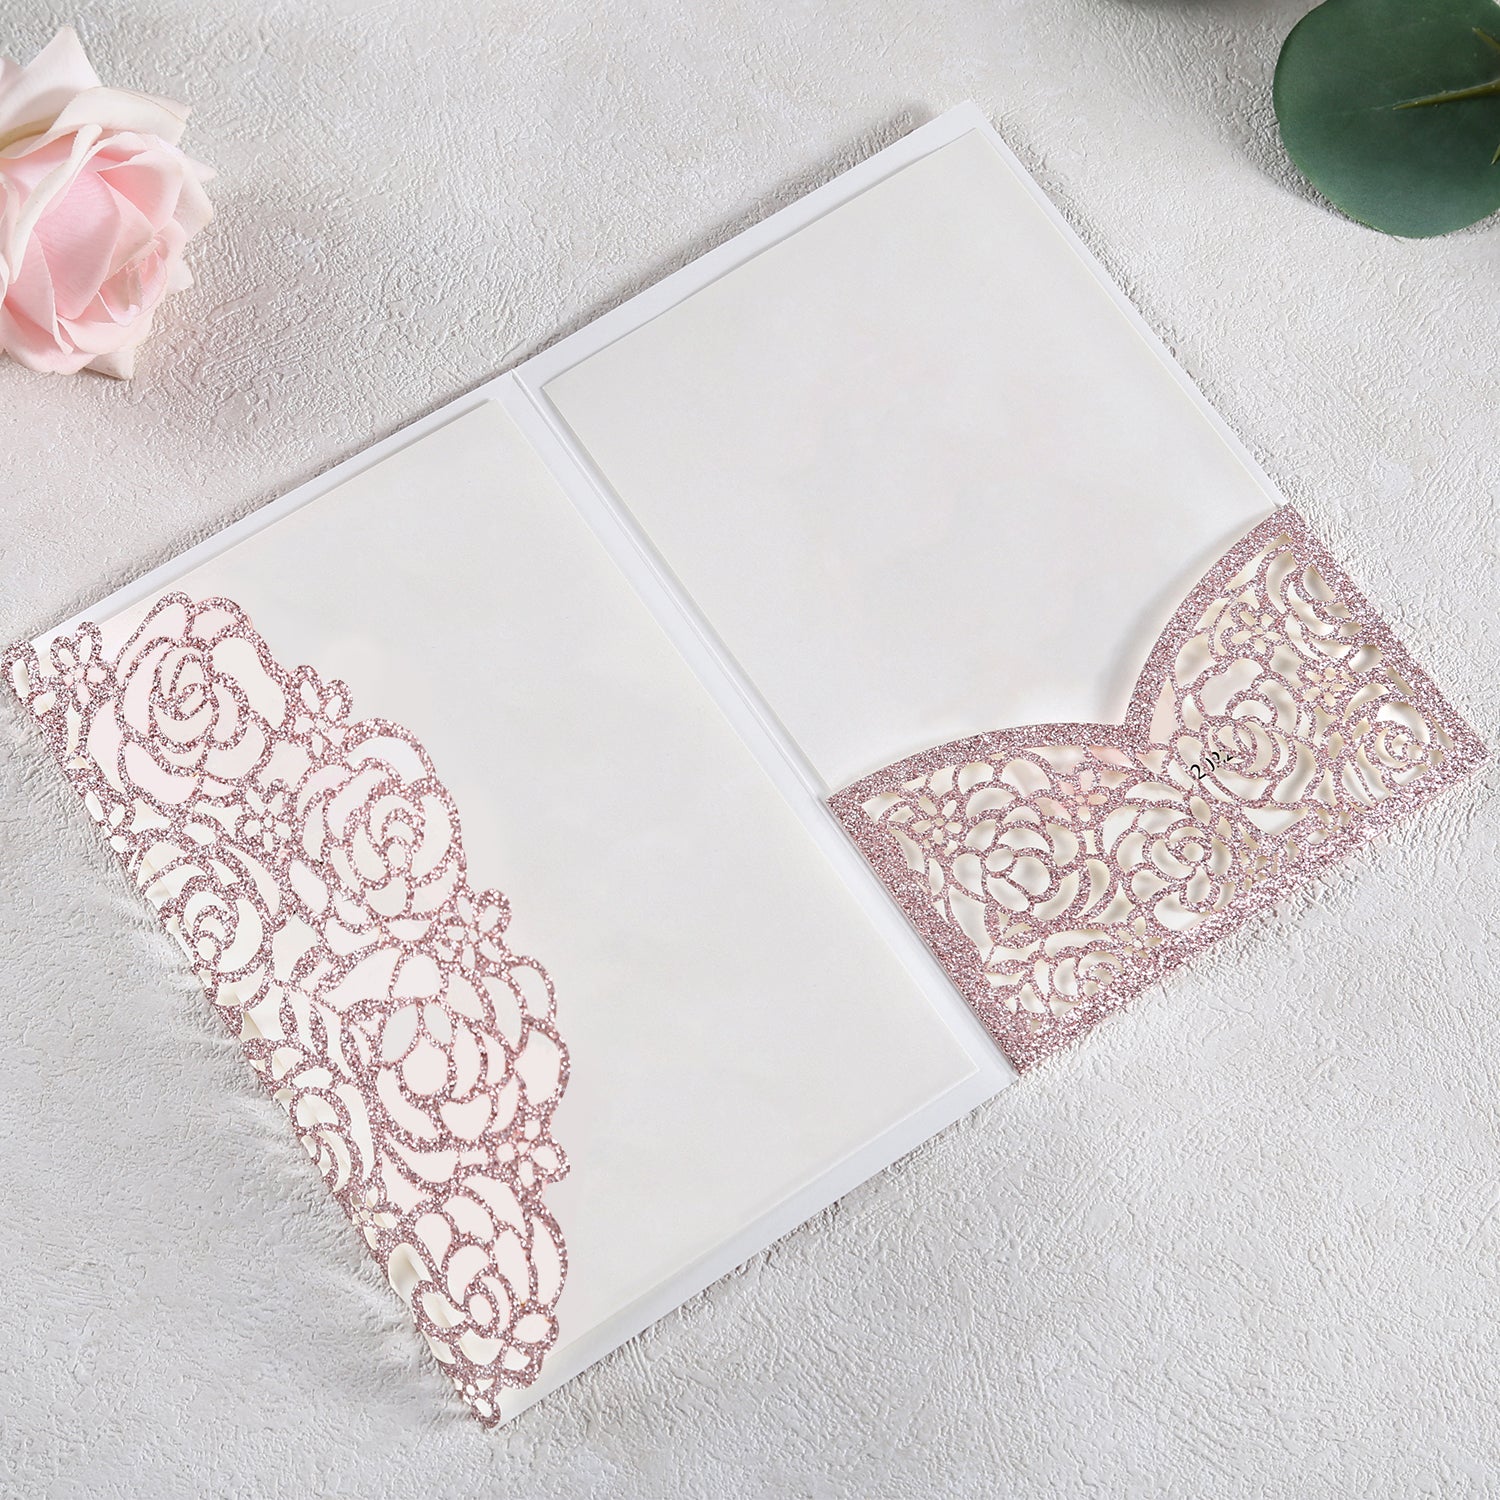 4.7 x7 inch Rose Gold Glitter Laser Cut Hollow Rose Wedding Invitations Cards with Glitter Pockets and Envelopes for Quincenera Birthday Party - DorisHome